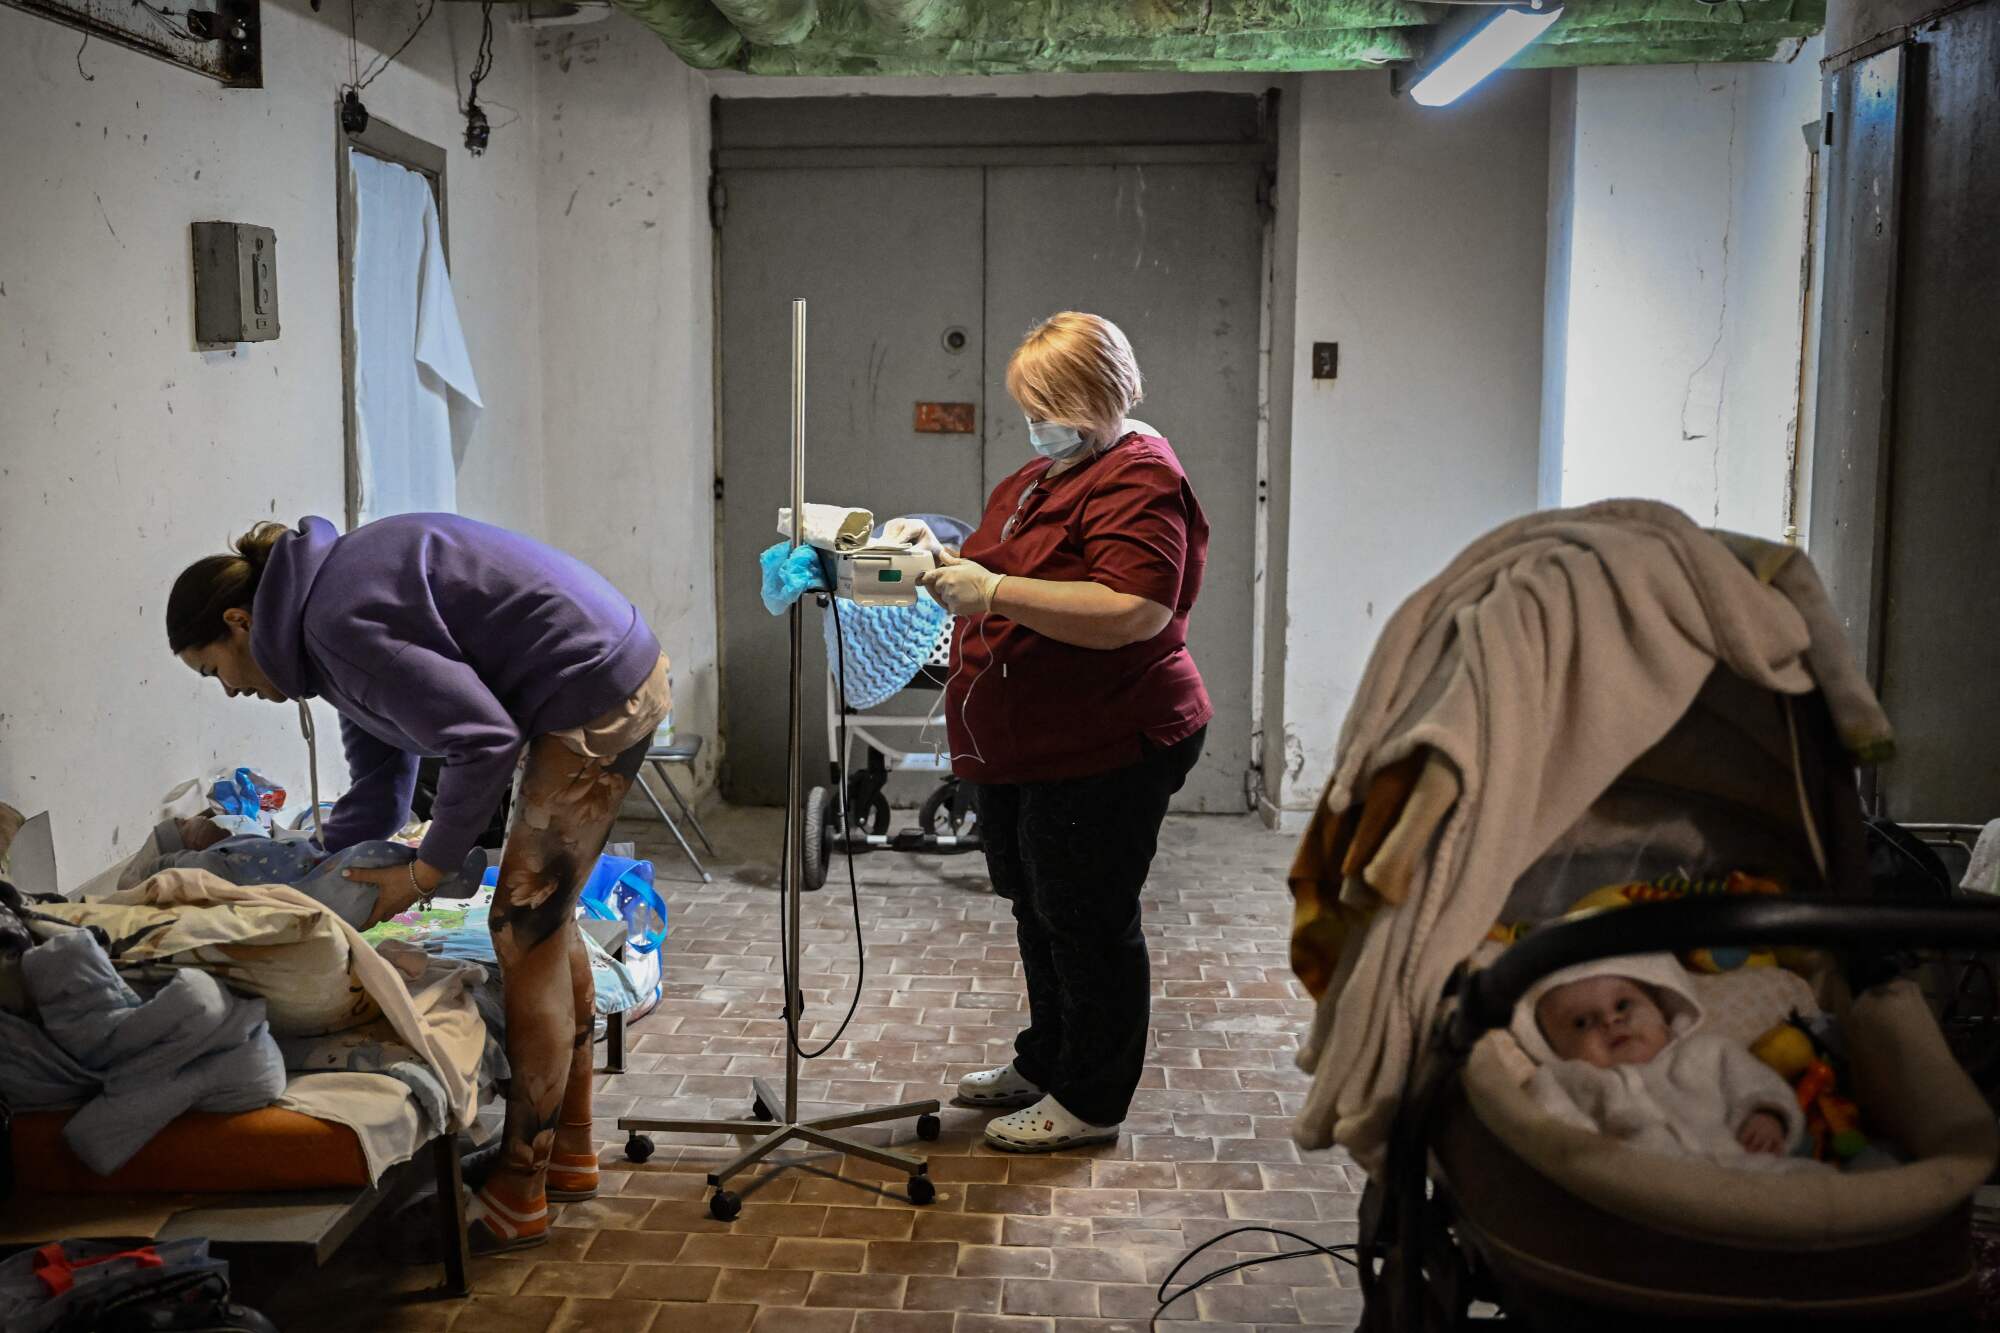 A nurse checks a baby in a basement while another person stands nearby